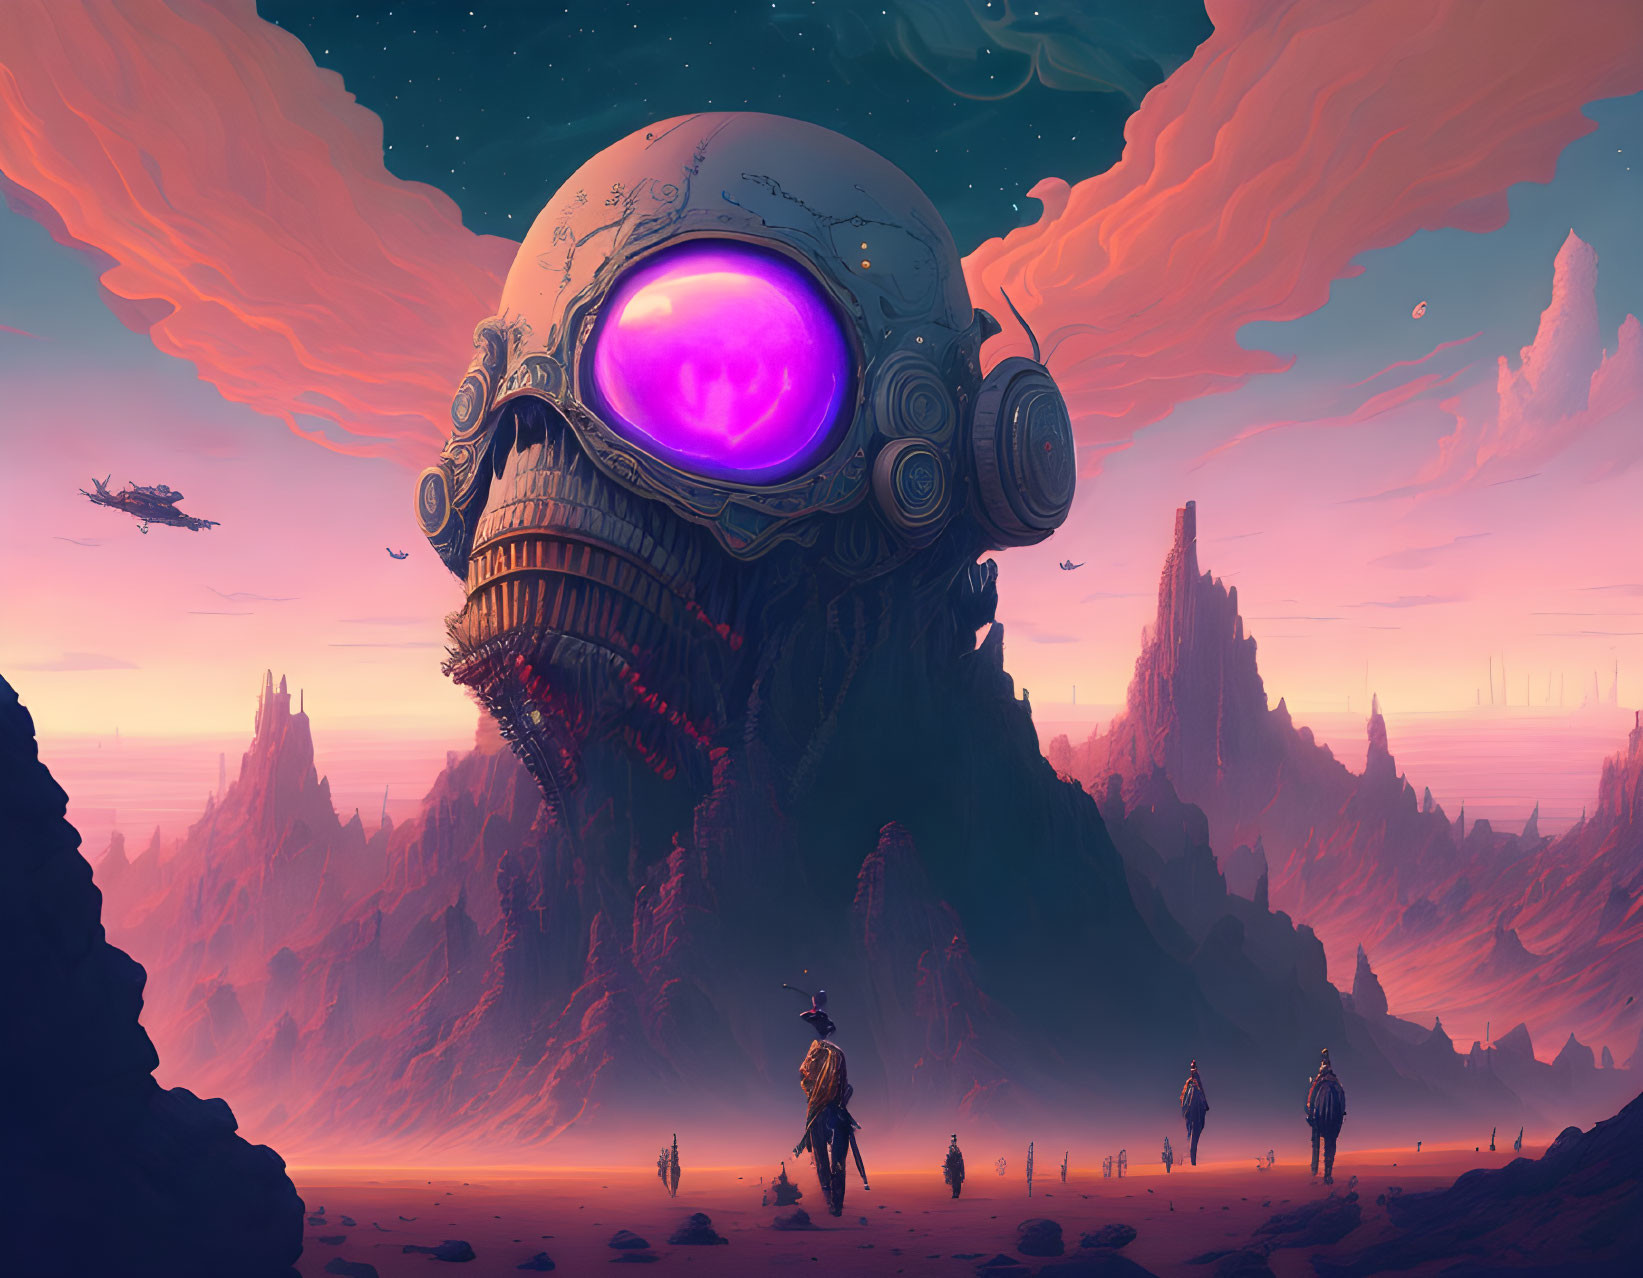 Surreal landscape with giant skull, glowing purple eye, rocky spires, small figures on alien